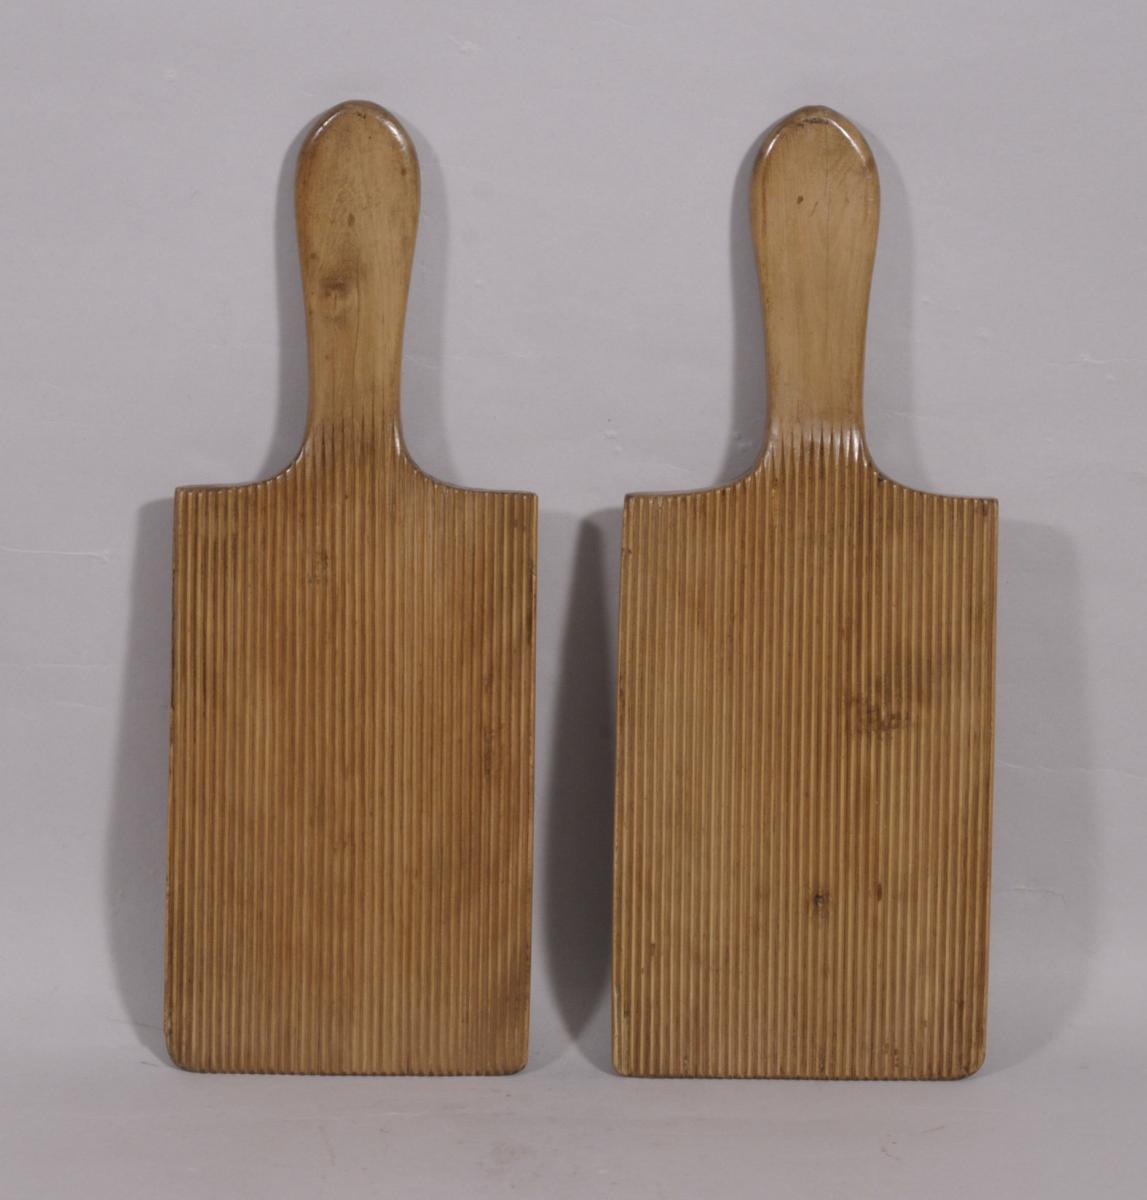 S/3995 Antique Treen Early 19th Century Pair of Large Boxwood Butter Hands